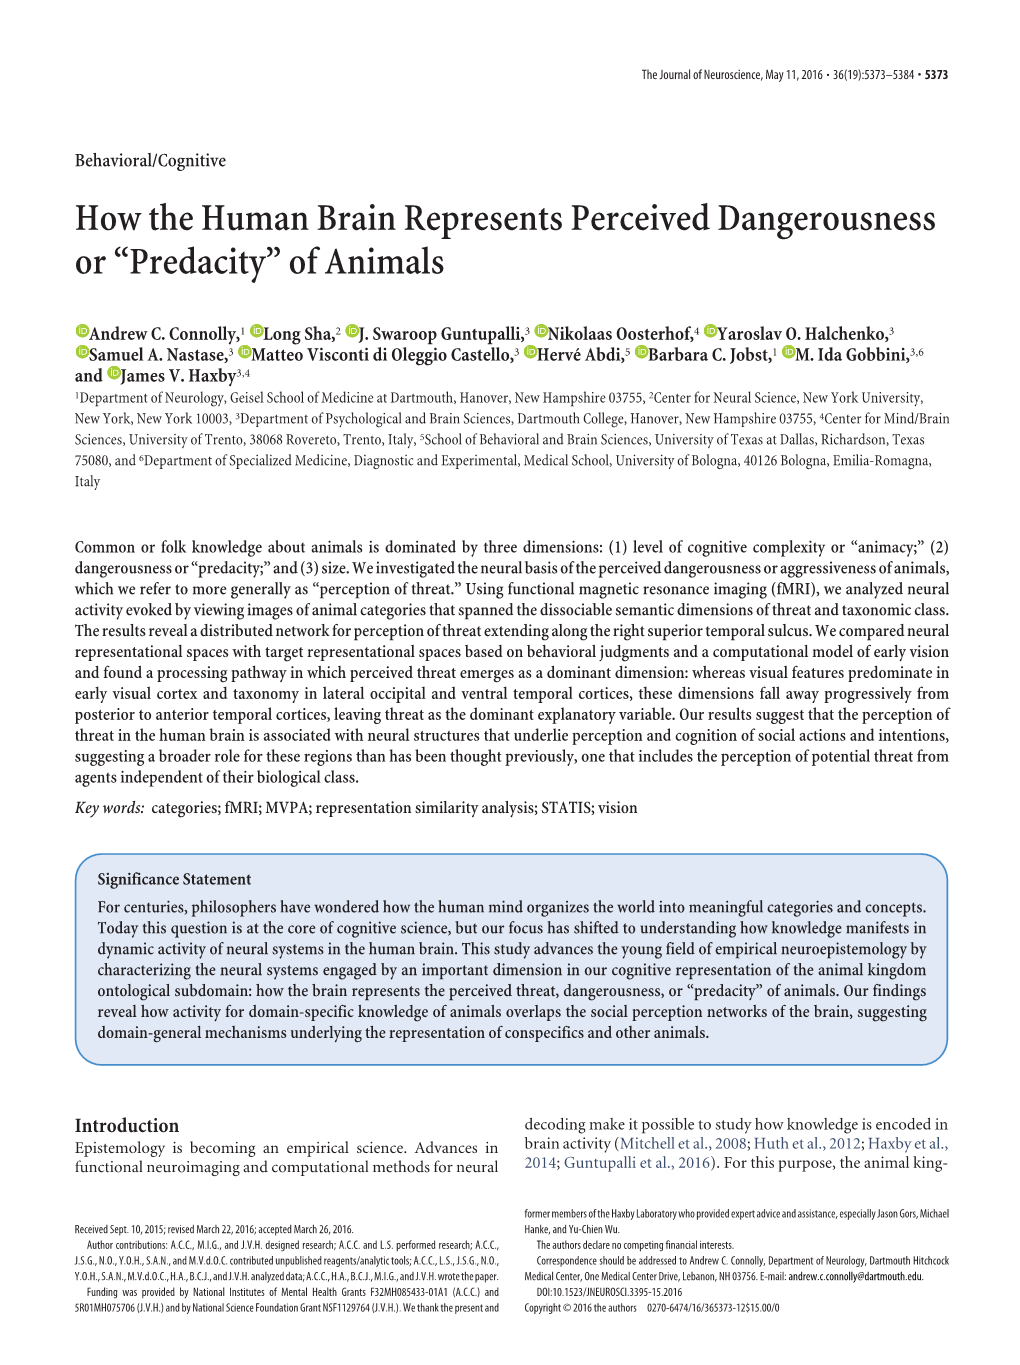 How the Human Brain Represents Perceived Dangerousness Or “Predacity” of Animals